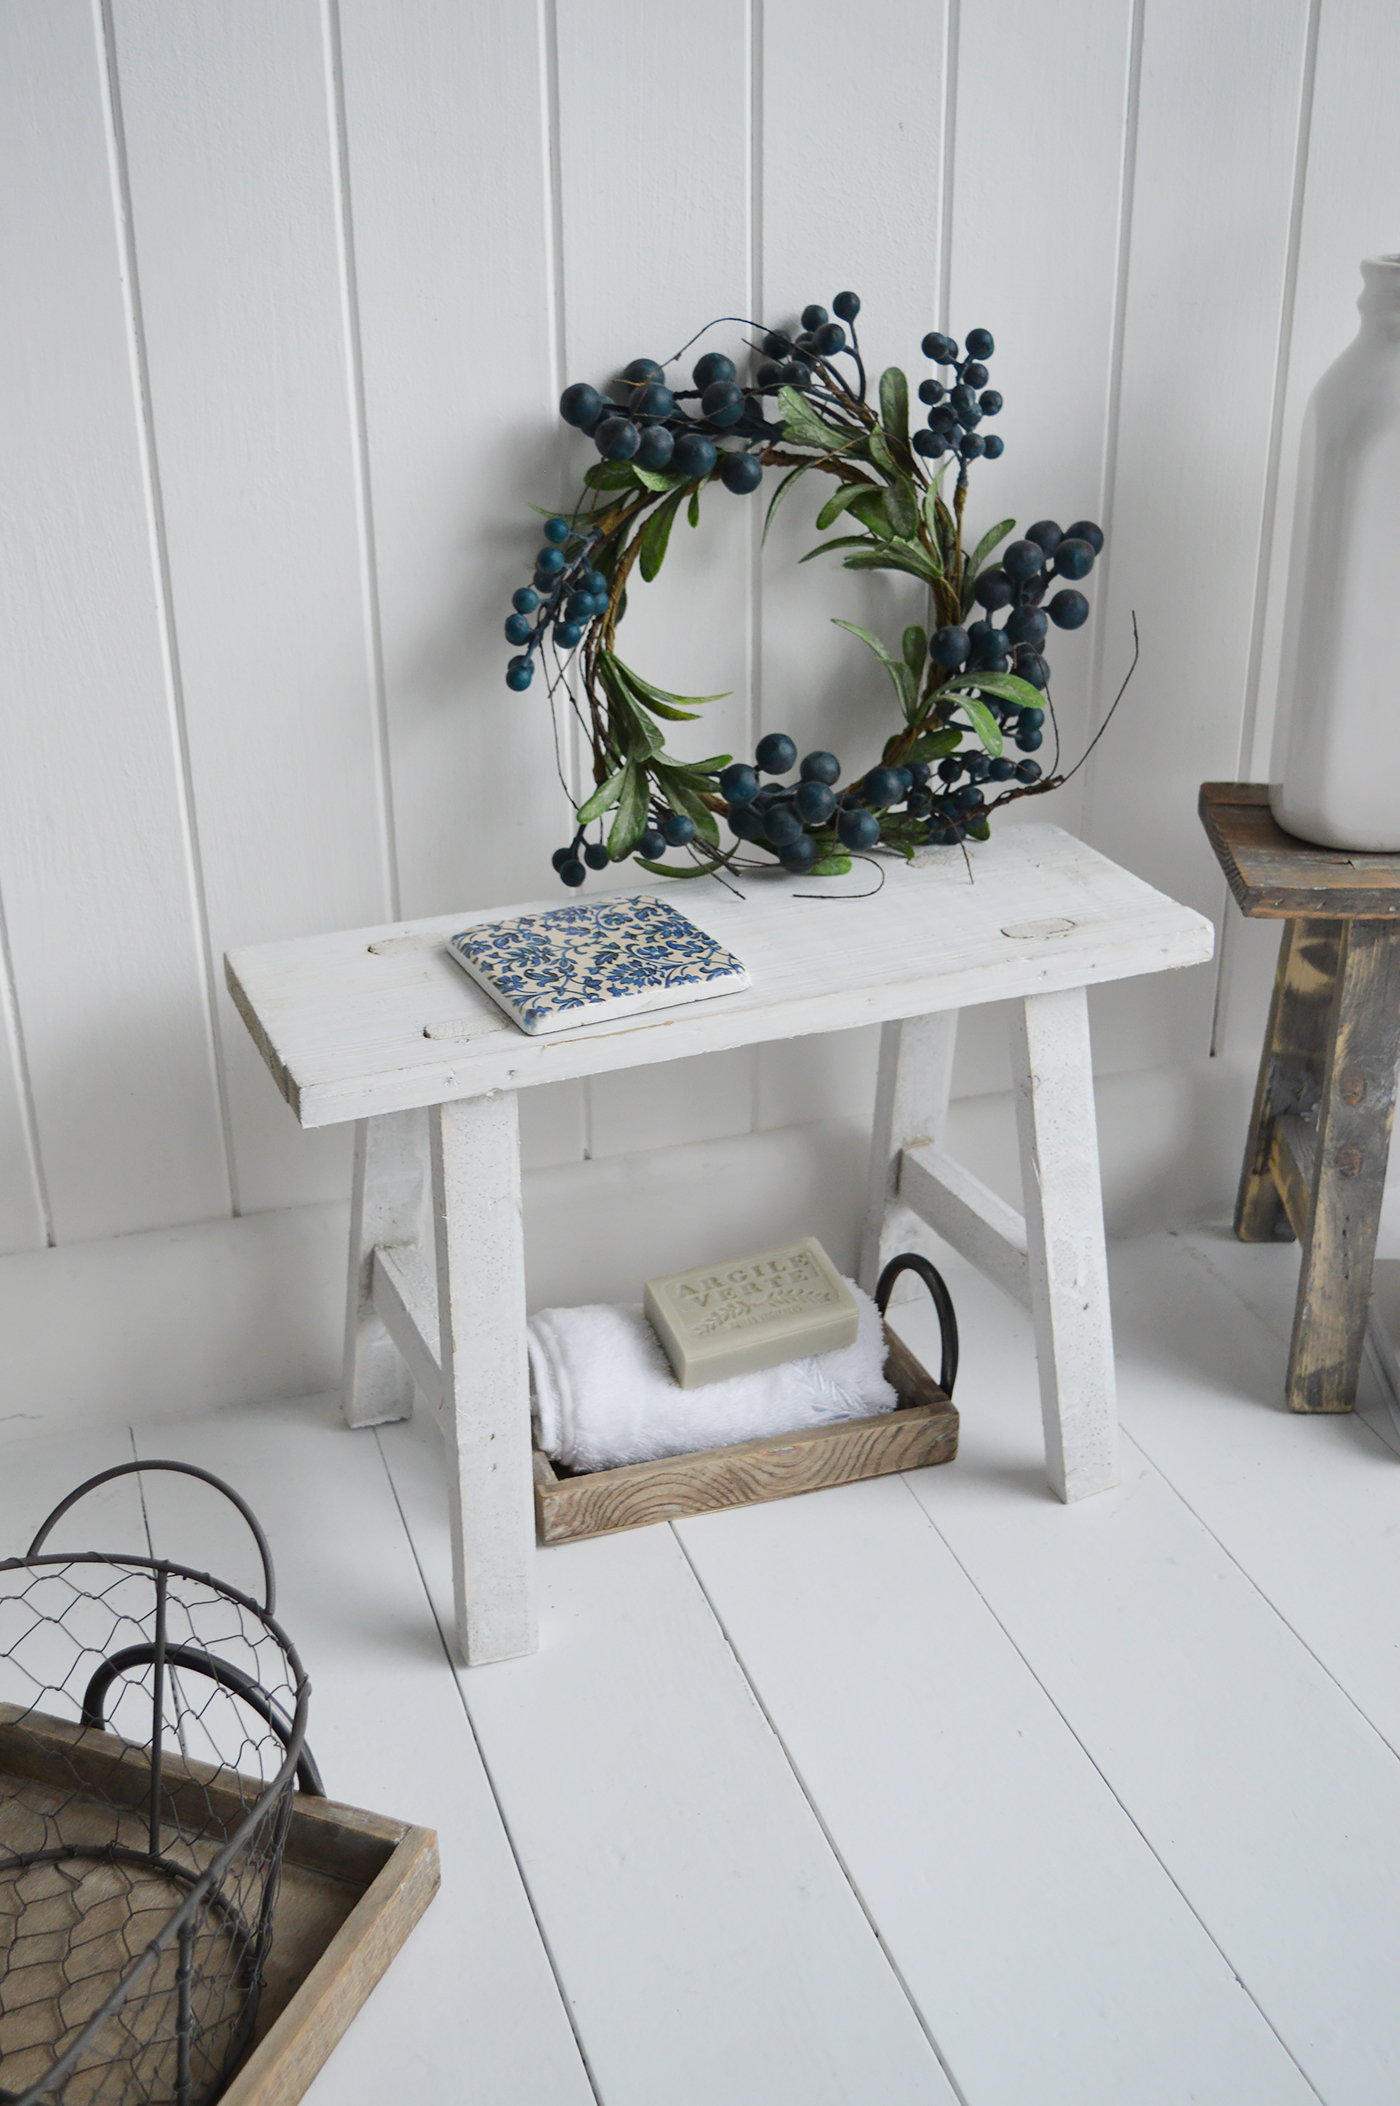 Pawtucket Grey and white Wooden Stools Side Table for coastal and country interiors from The White Lighthouse. New England style interiors for Bathroom, Living Room, Bedroom and Hallway Furniture for beautiful homes